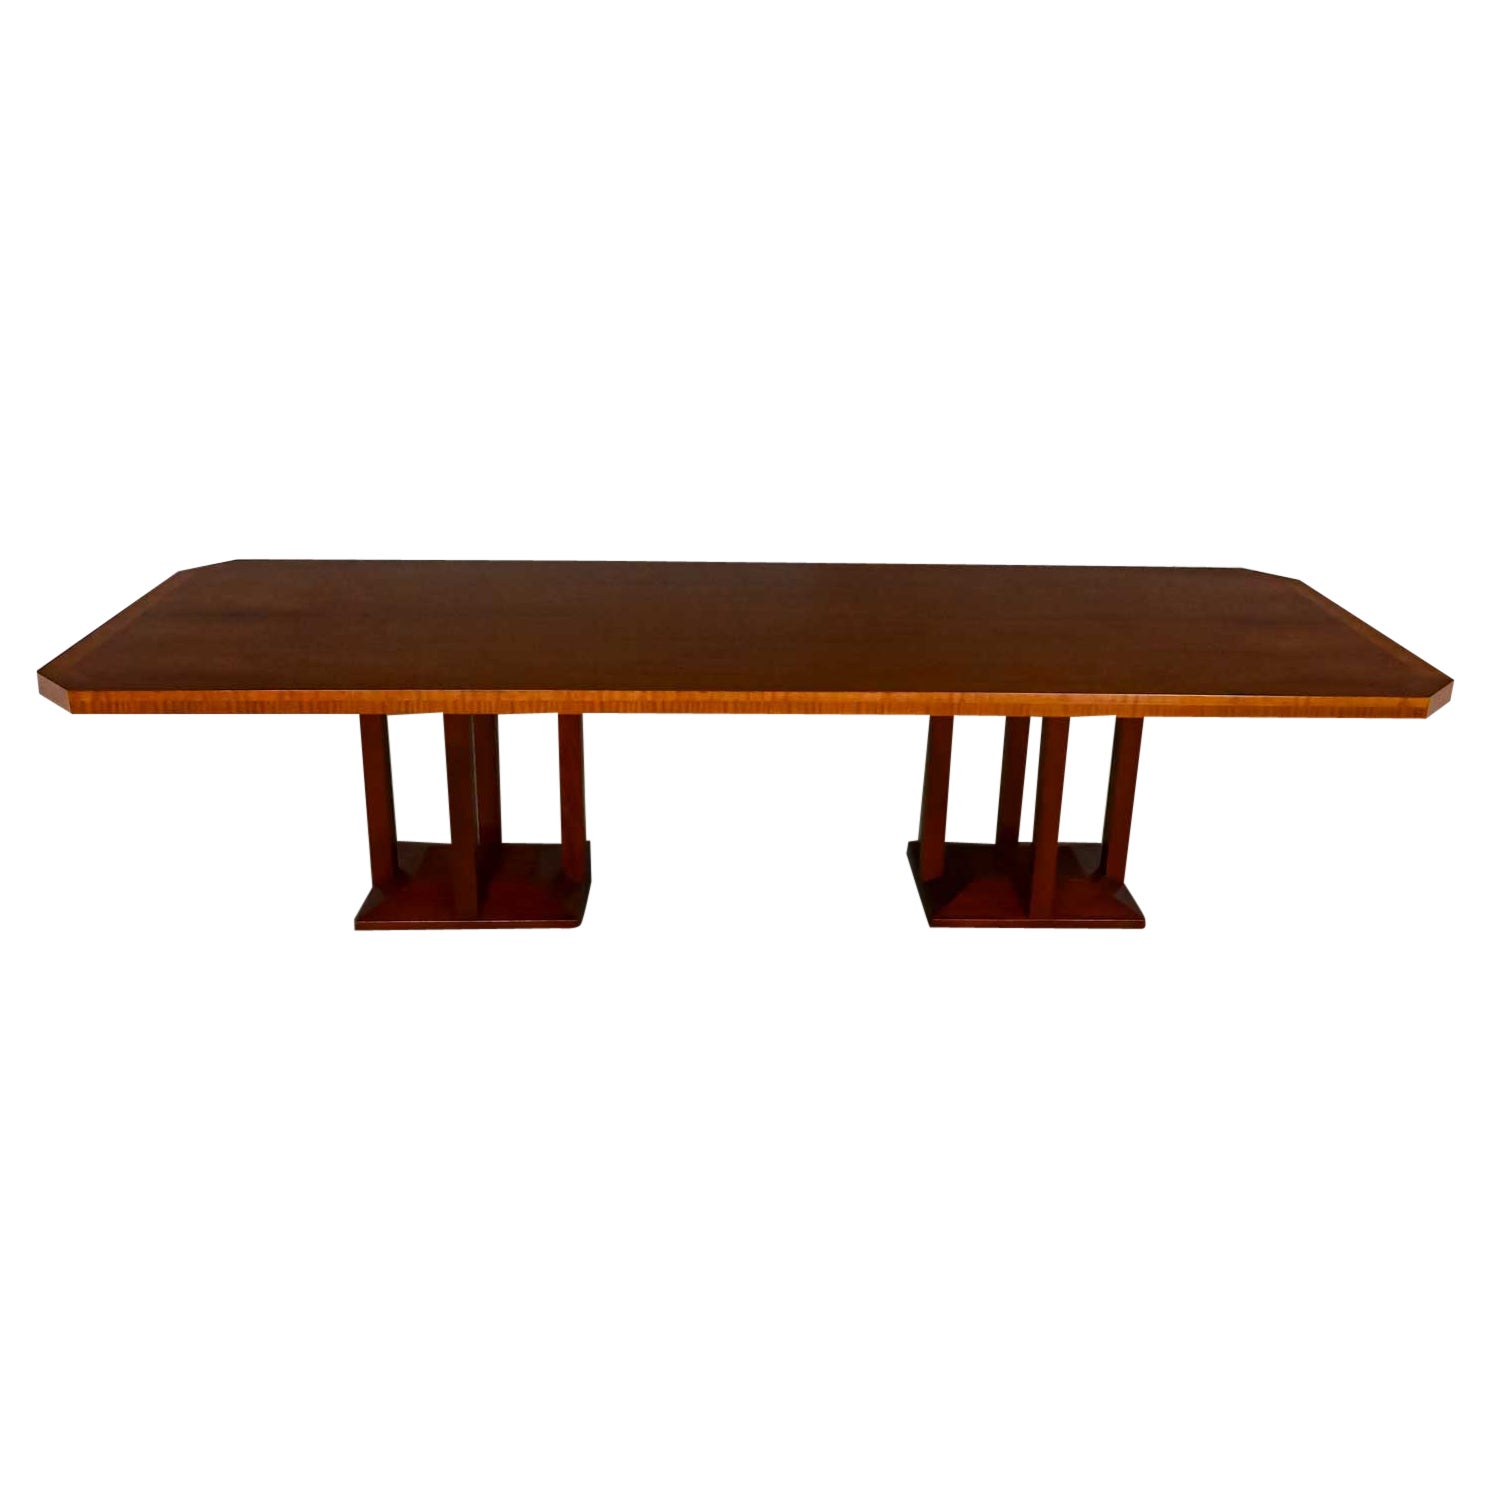 Late 20th C Modern Large Custom Mahogany Dbl Pedestal Dining or Conference Table For Sale